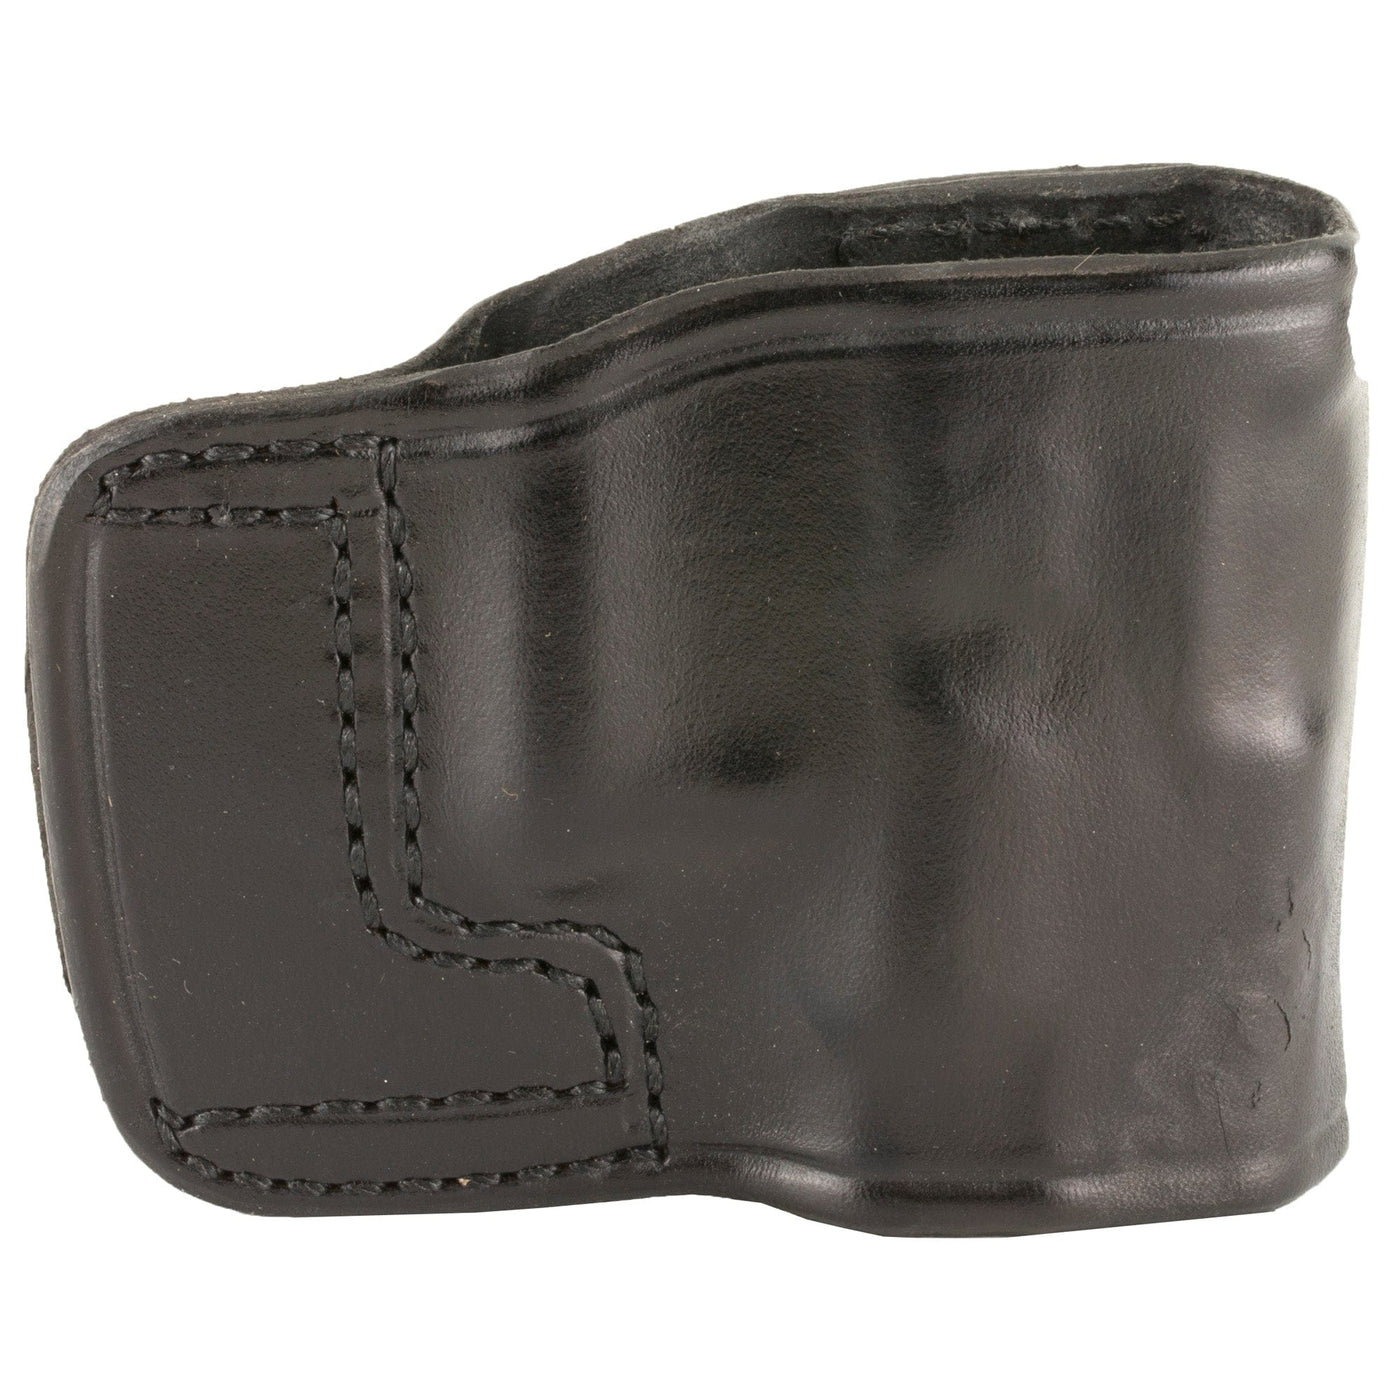 Don Hume D Hume Jit 41 For Glk Rh Black Holsters